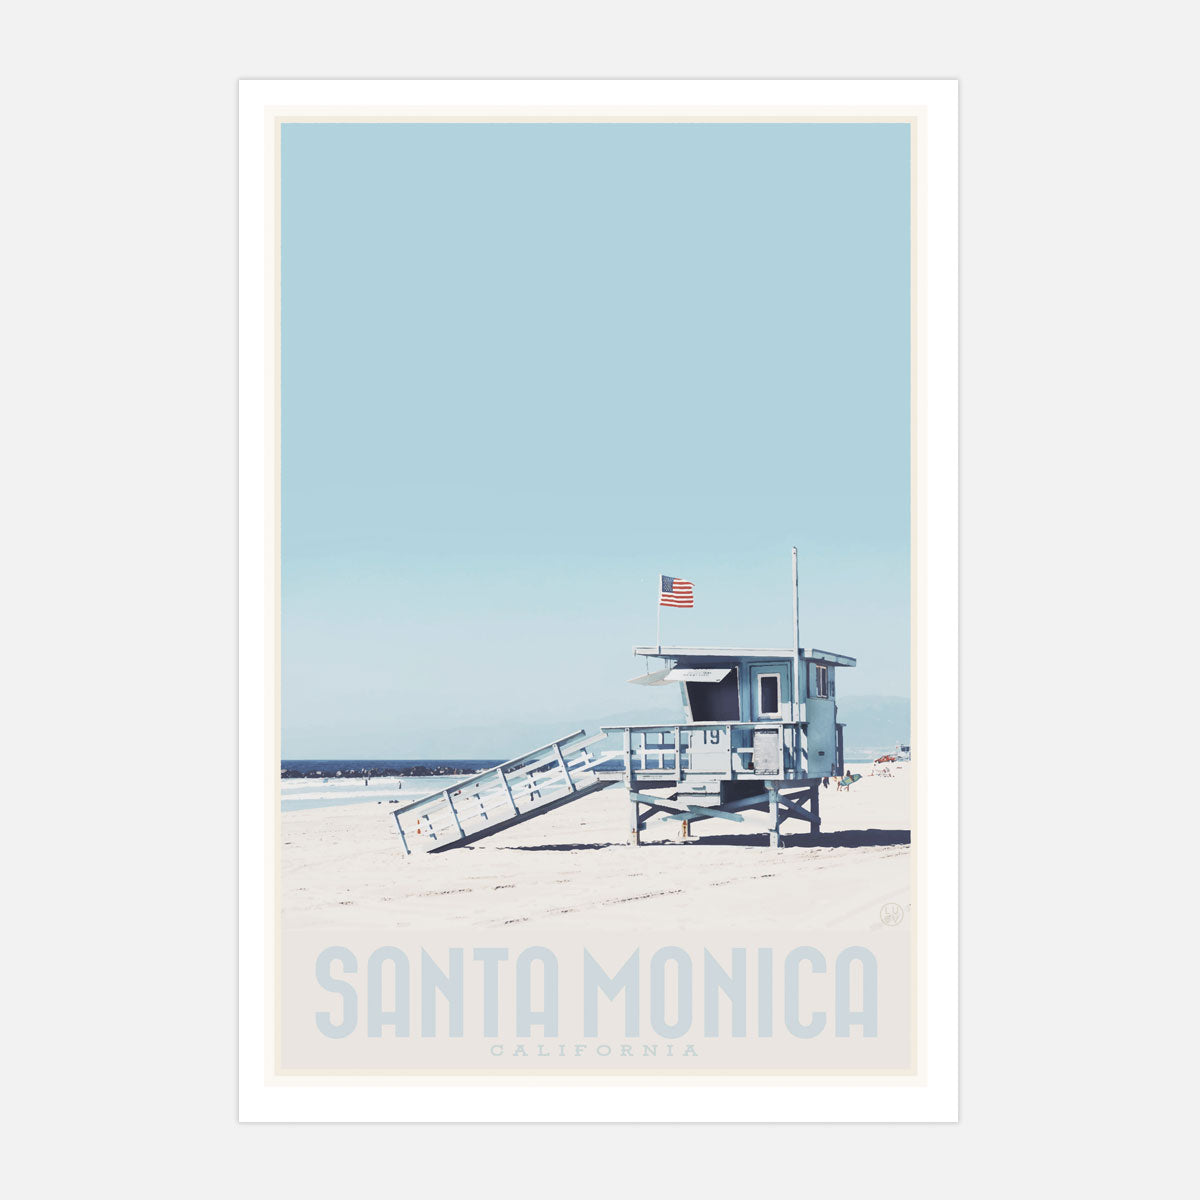 Santa Monica California vintage travel style print by Placesweluv